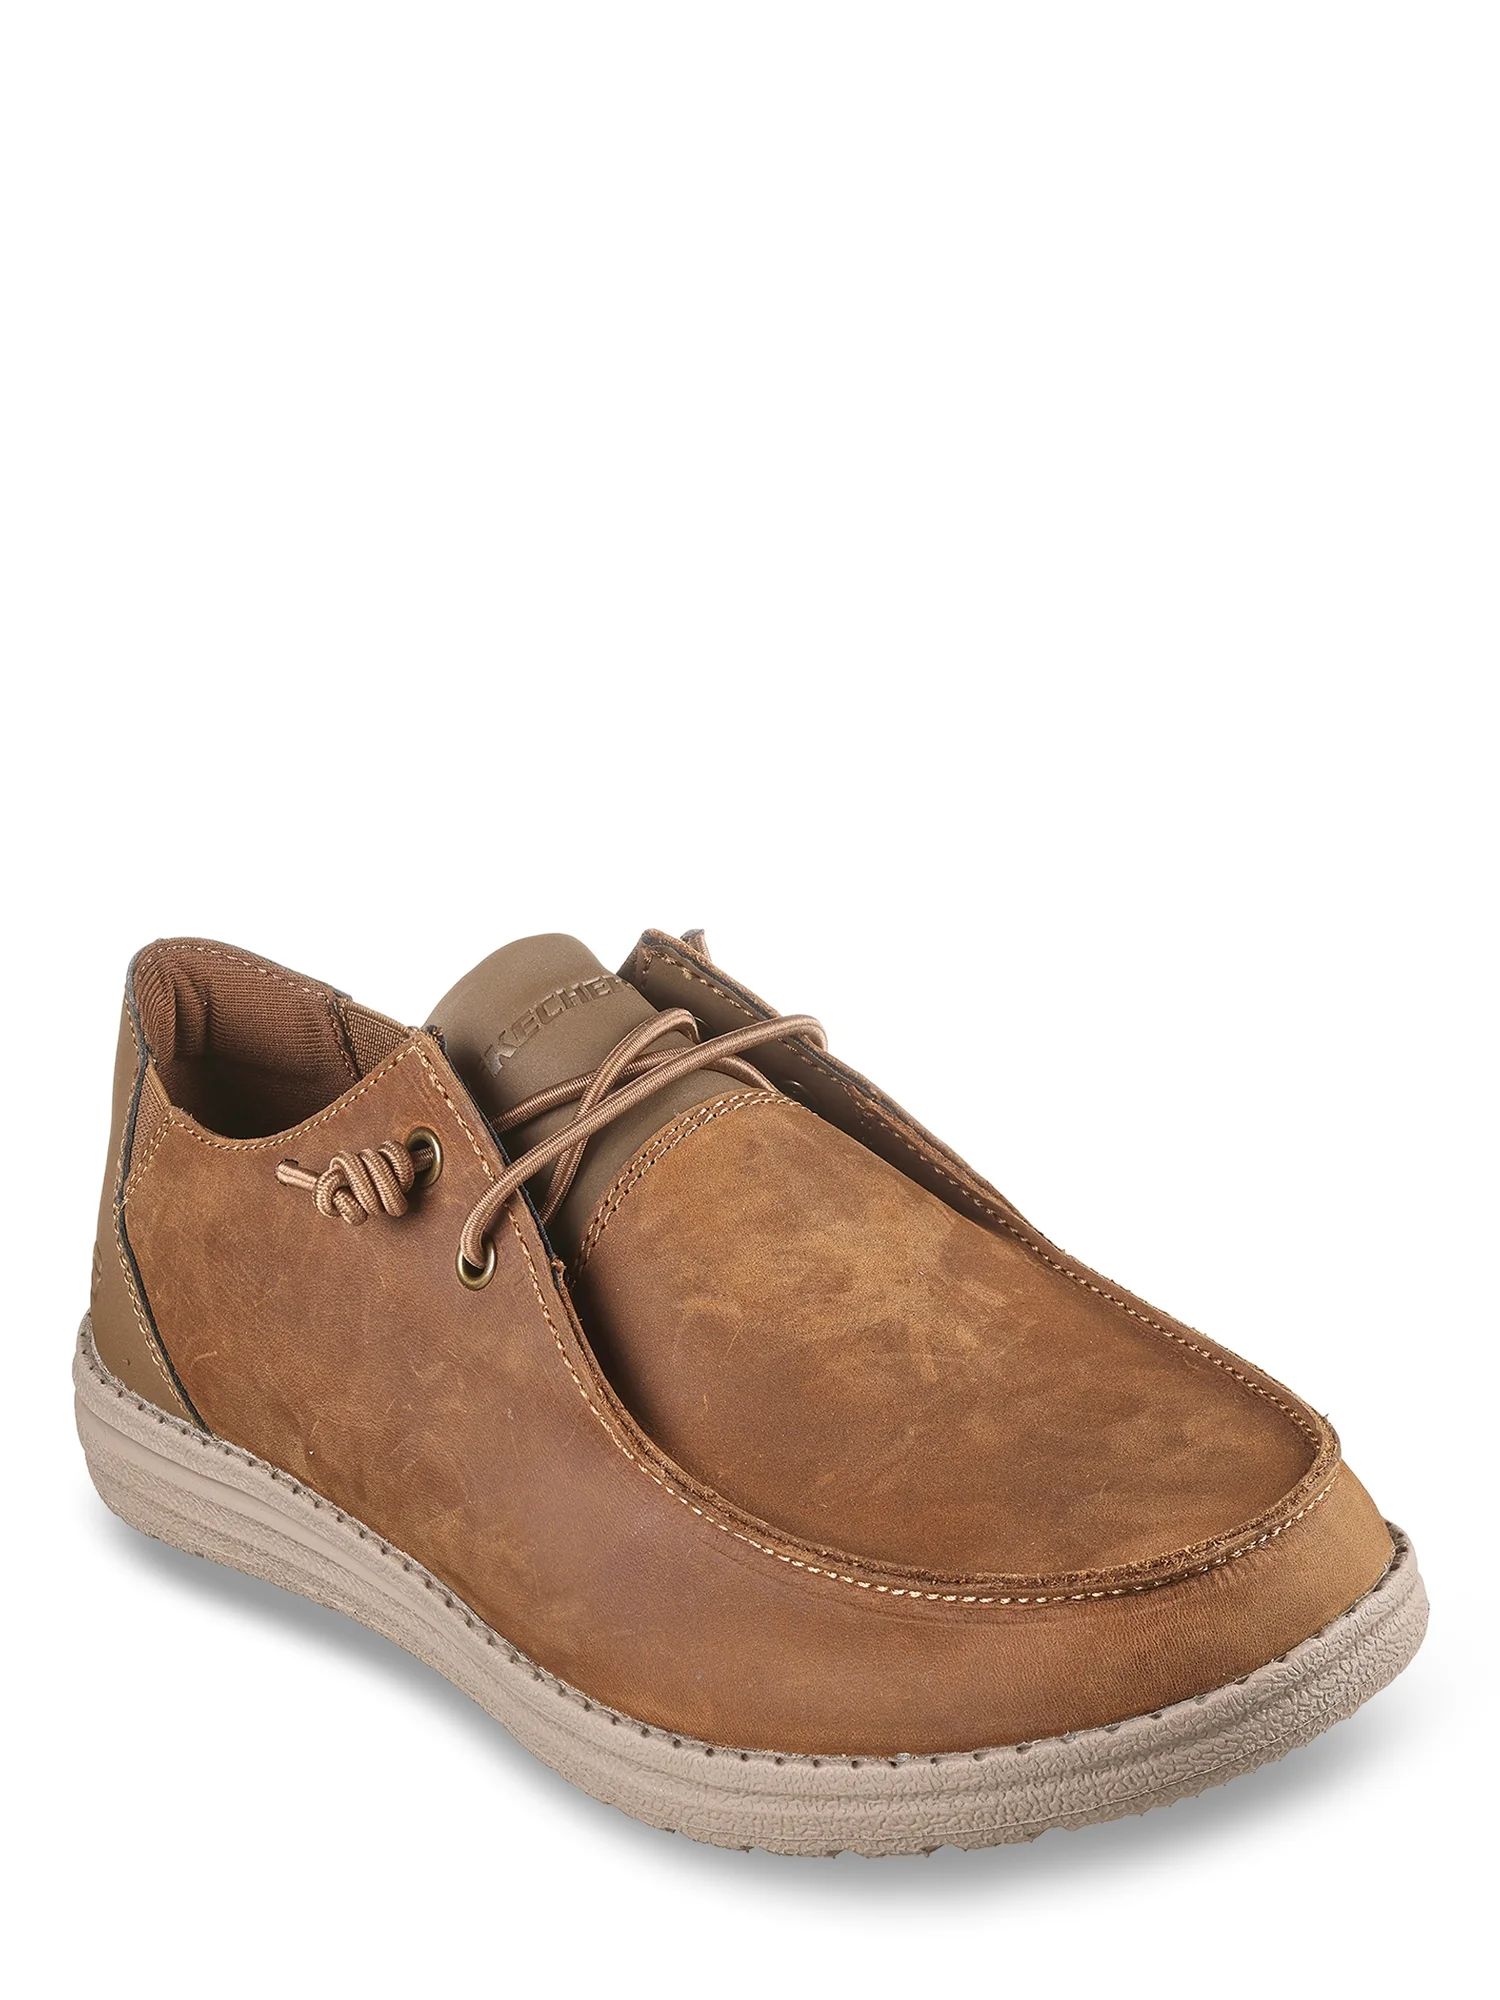 Skechers Men's Melson Ramilo Relaxed Fit Leather Moc Toe | Walmart (US)